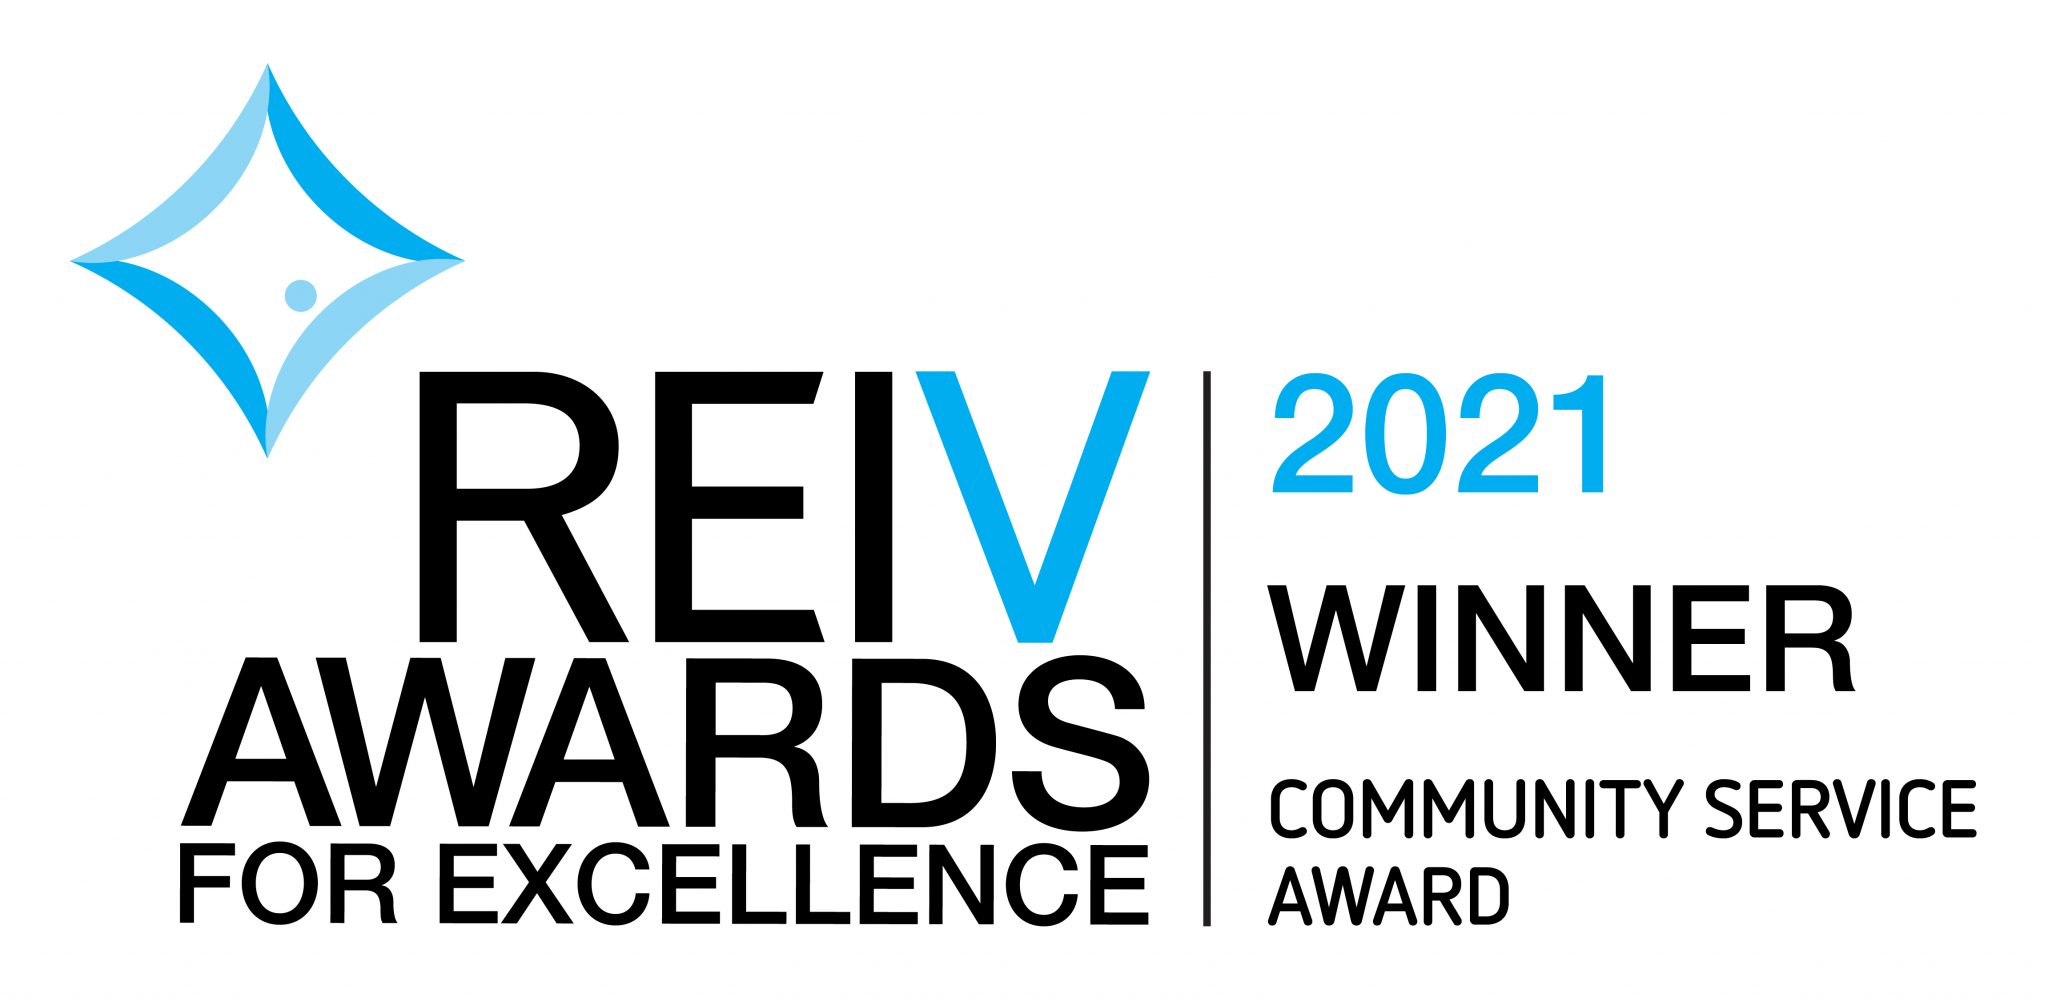 HomeGround Real Estate wins big at the REIV Awards for Excellence!